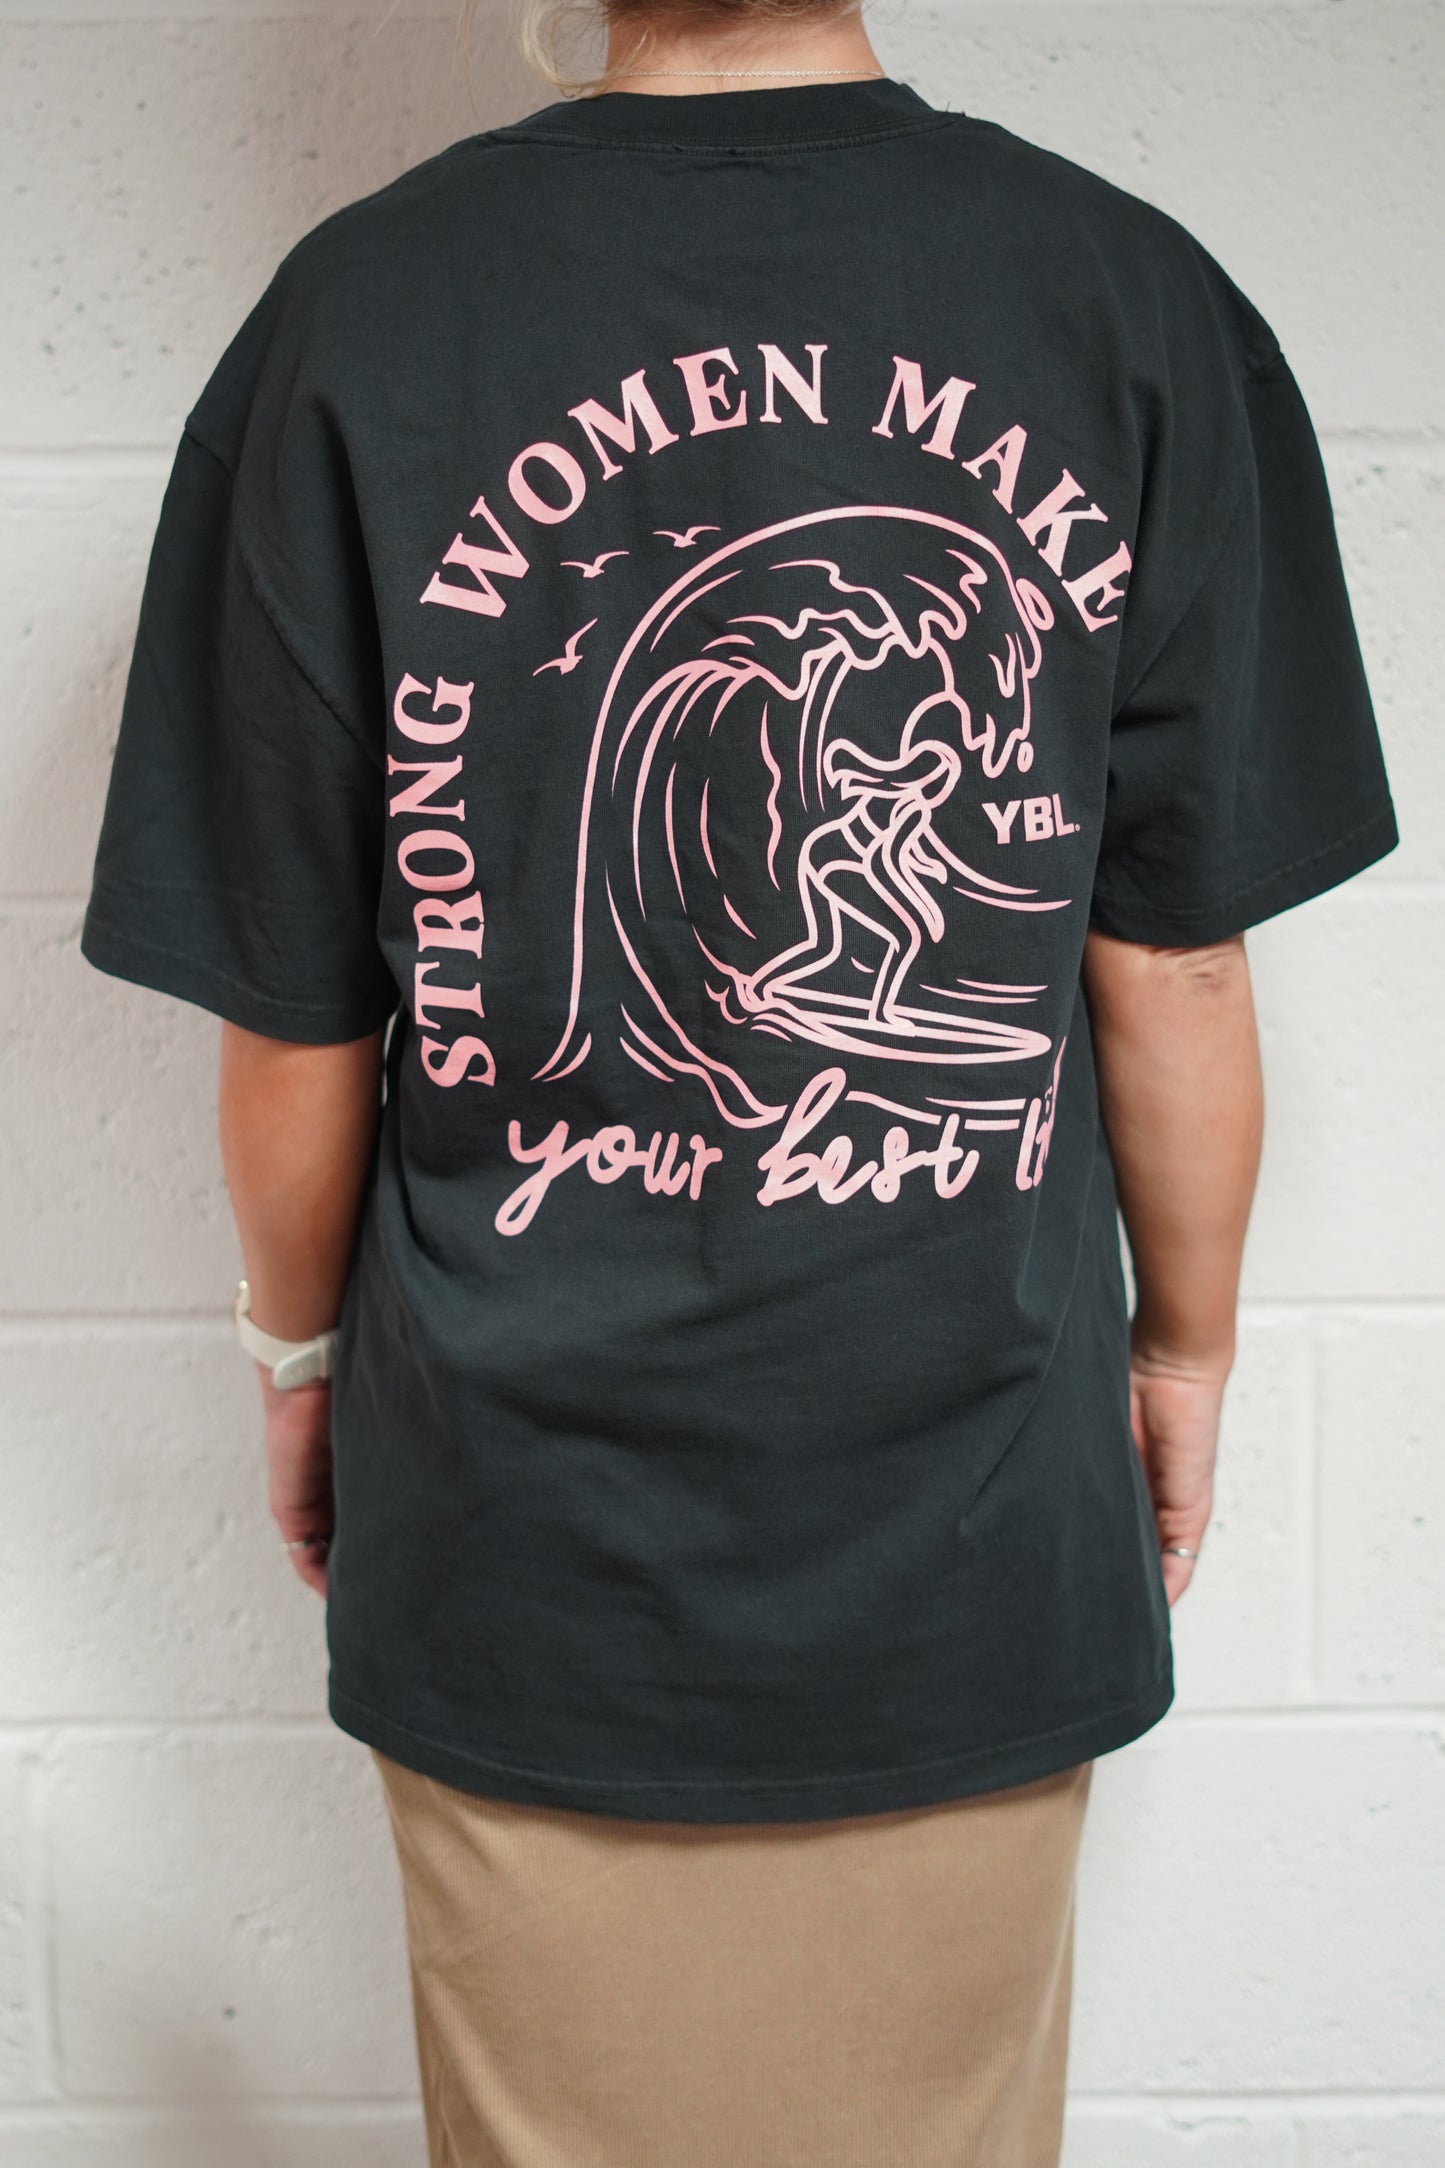 Strong Women Make Waves Heavy Faded Tee in Faded Black with Pink Print